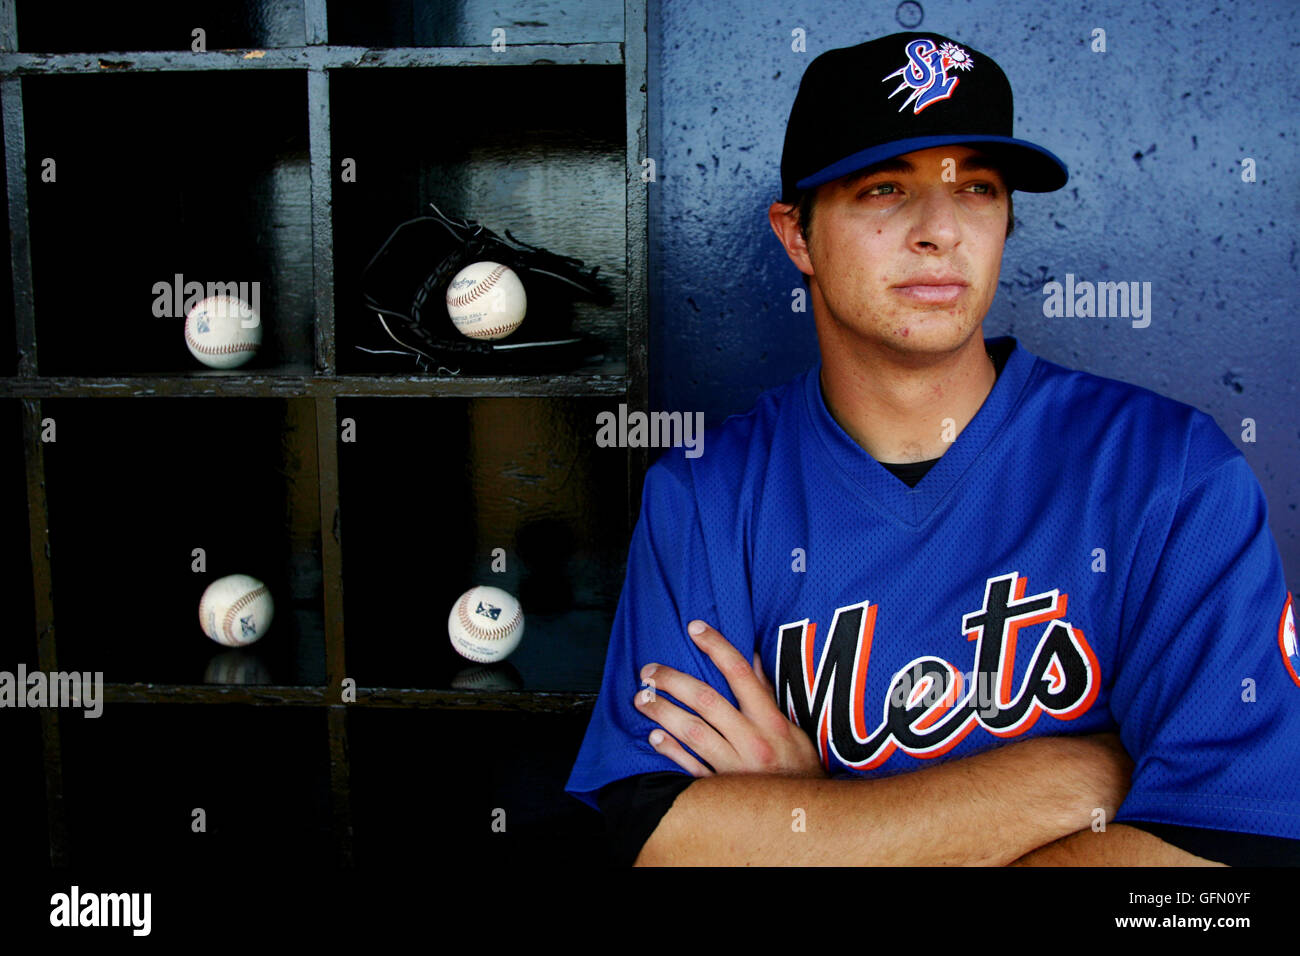 August 1, 2016 - Florida, U.S. - 040208 tc spt mets-- (4 of 5)--0051113A- Staff Photos by Amanda Voisard/The Palm Beach Post----for tc spt story by Chuck King ---  Port St. Lucie-- St. Lucie Mets player Brant Rustich at in the St. Lucie Mets dugout at Tradition Field on Wednesday-- 04/02/08 NOT FOR DISTRIBUTION OUTSIDE COX PAPERS. OUT PALM BEACH, BROWARD, MARTIN, ST. LUCIE, INDIAN RIVER AND OKEECHOBEE COUNTIES IN FLORIDA. OUT ORLANDO. OUT TV. OUT MAGAZINES. OUT TABLOIDS. OUT WIDE WORLD. OUT INTERNET USE. NO SALES. (Credit Image: © Amanda Voisard/The Palm Beach Post via ZUMA Wire) Stock Photo